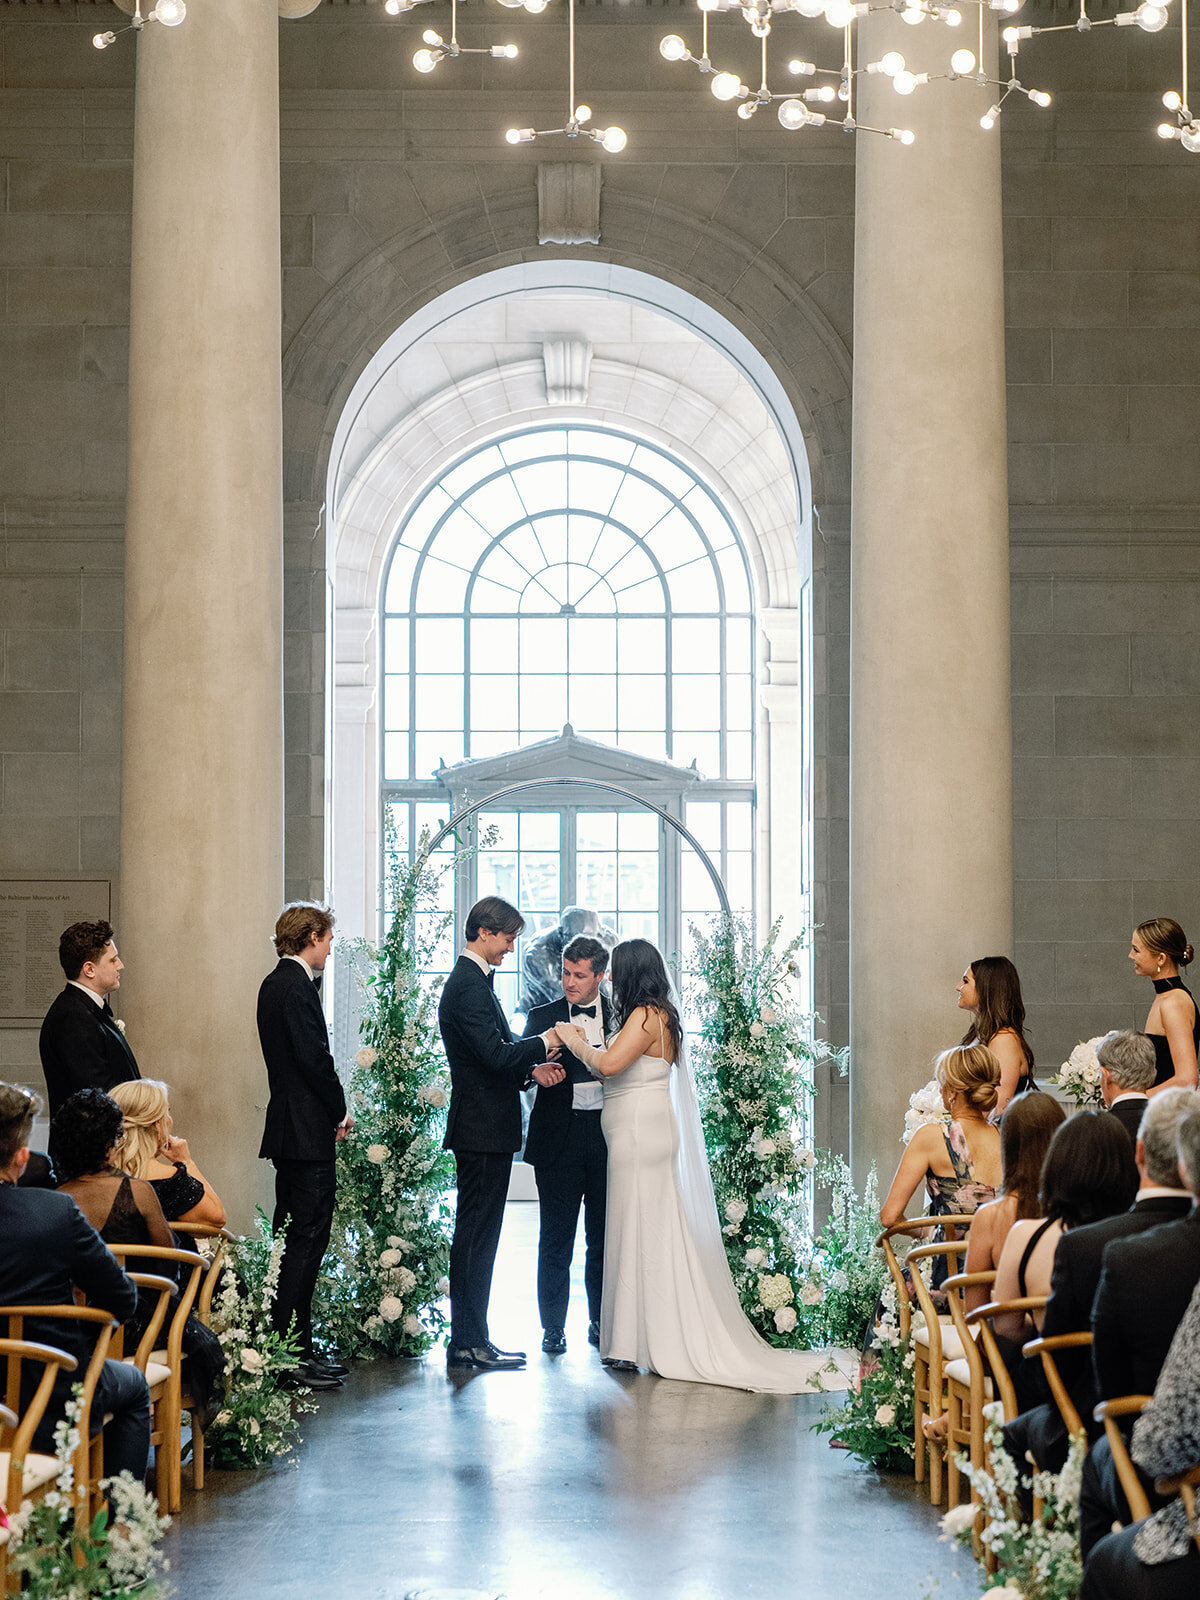 20_Kate Campbell Floral BMA Baltimore Museum of Art Wedding Ceremony by Nikki Daskalakis photo